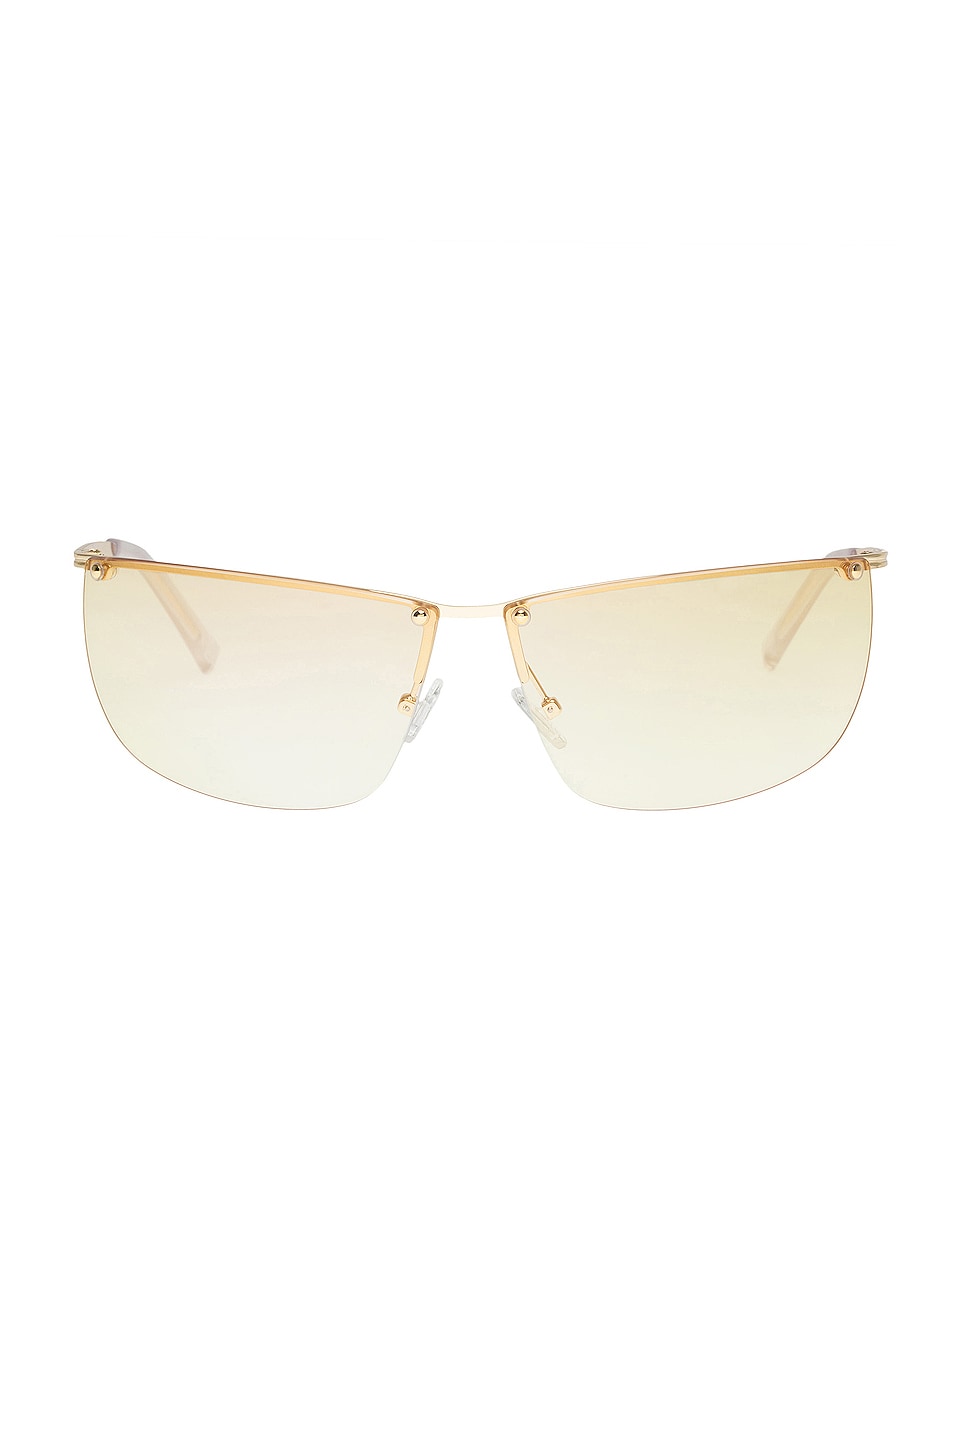 Le Specs Y20k Sunglasses in Gold Size One Size